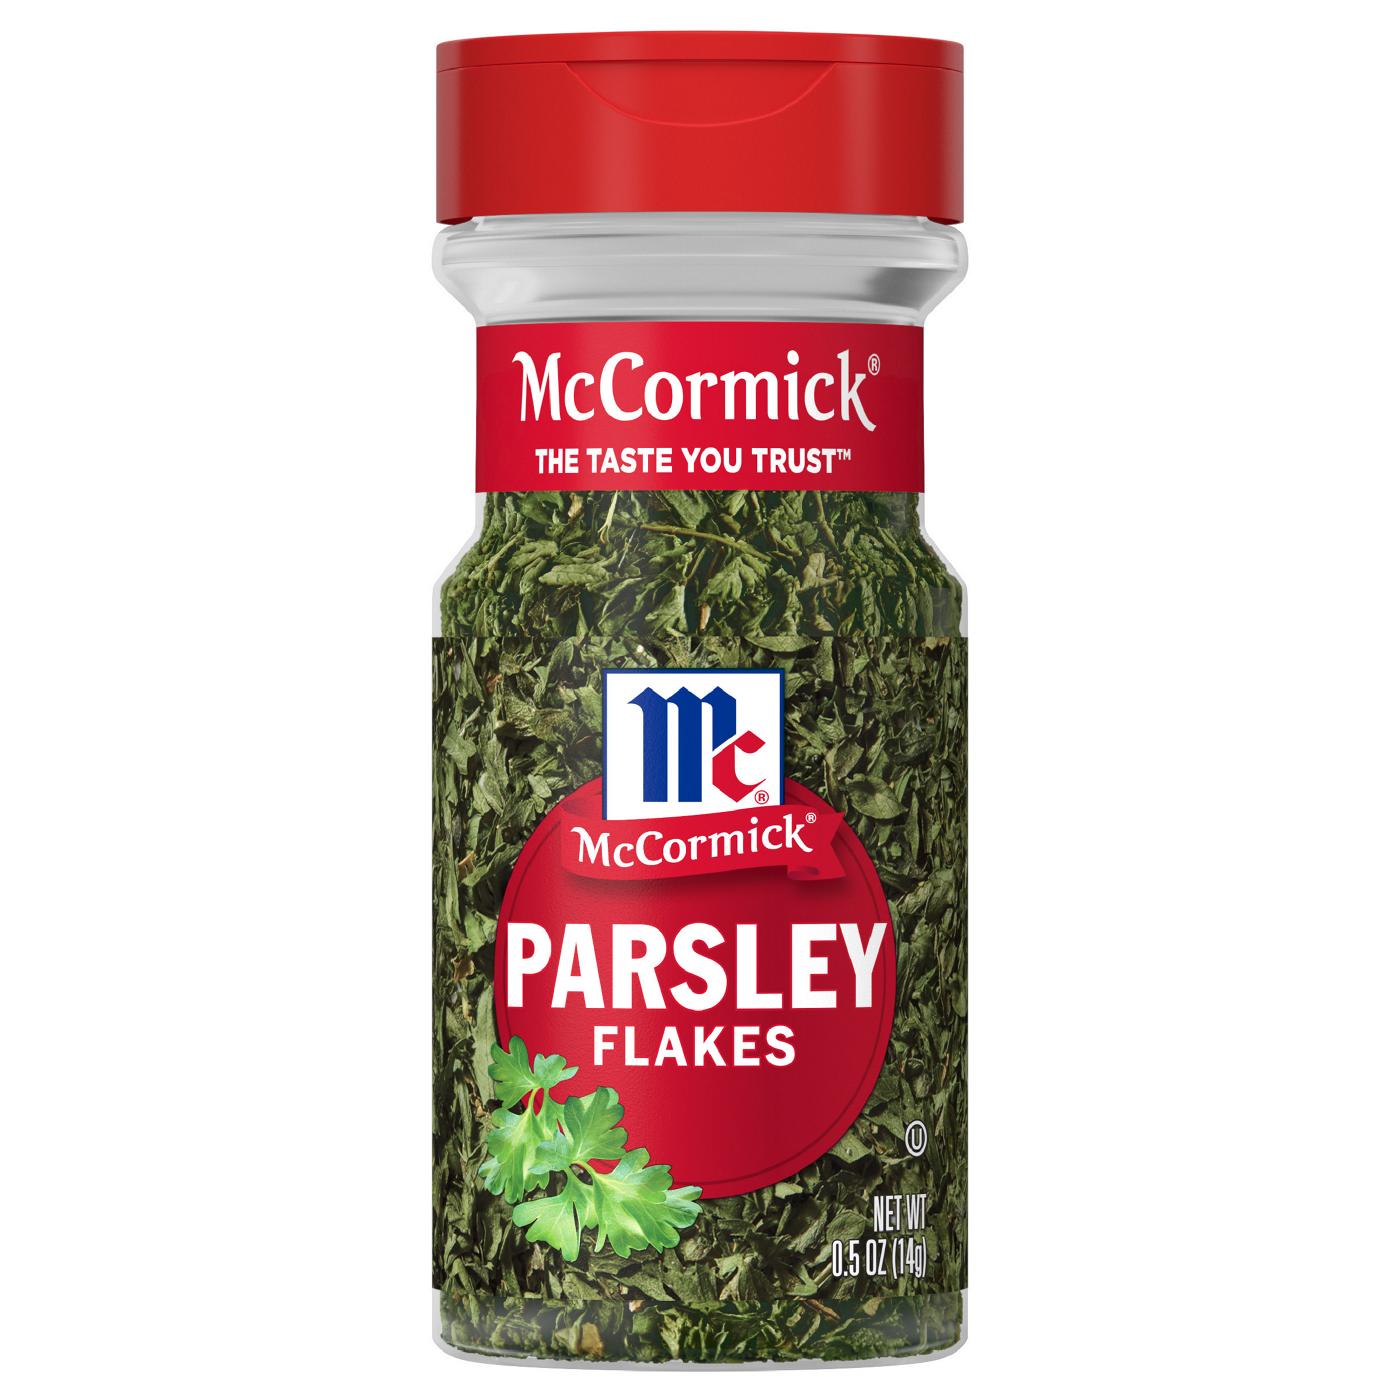 McCormick Parsley Flakes; image 1 of 8